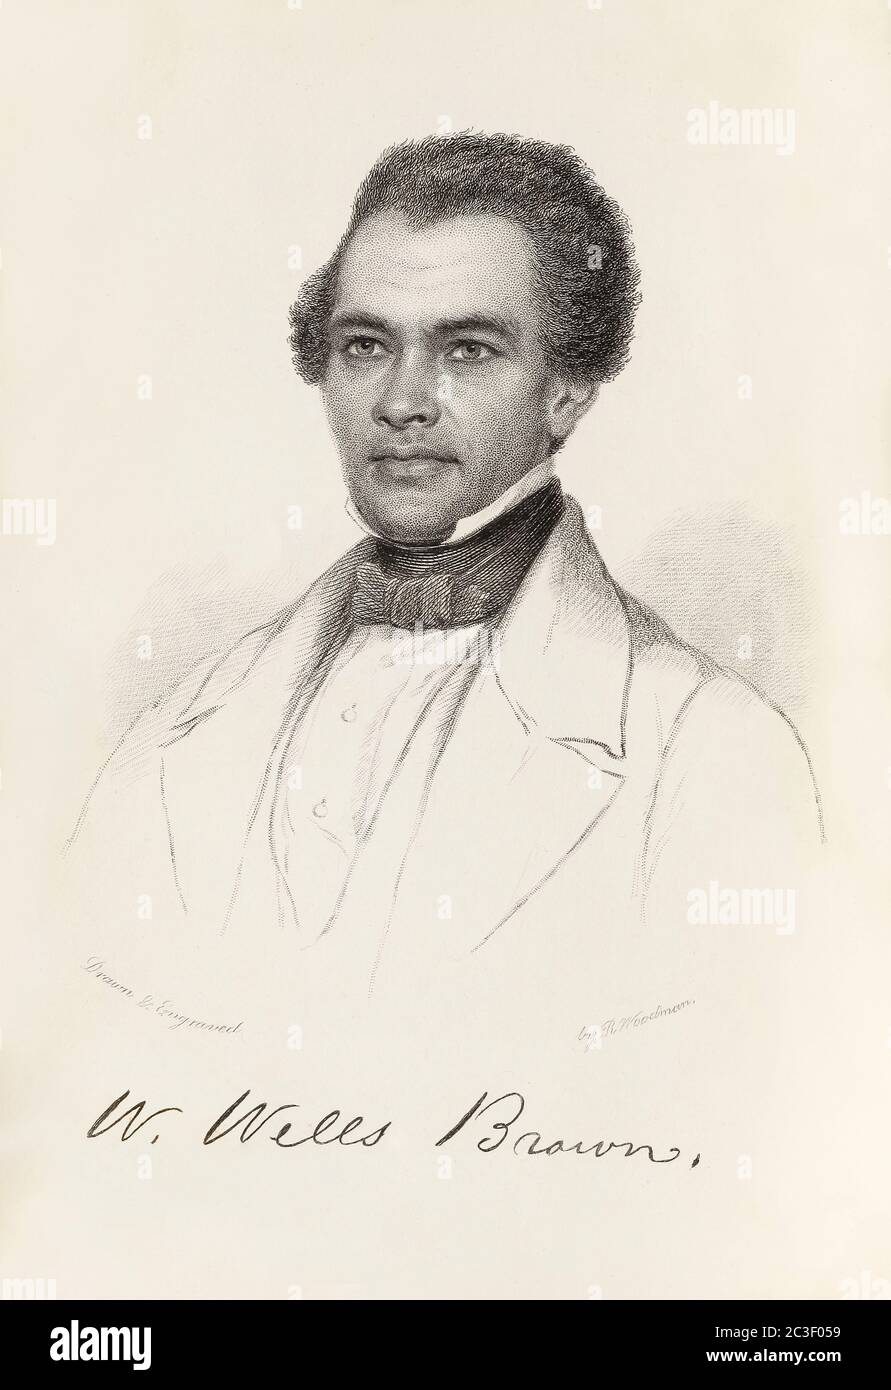 William Wells Brown (c.1814-1884) African-American abolitionist who was born into slavery before escaping, educating himself and writing a bestselling narrative of his life. He later became an accomplished playwright and novelist. Stock Photo